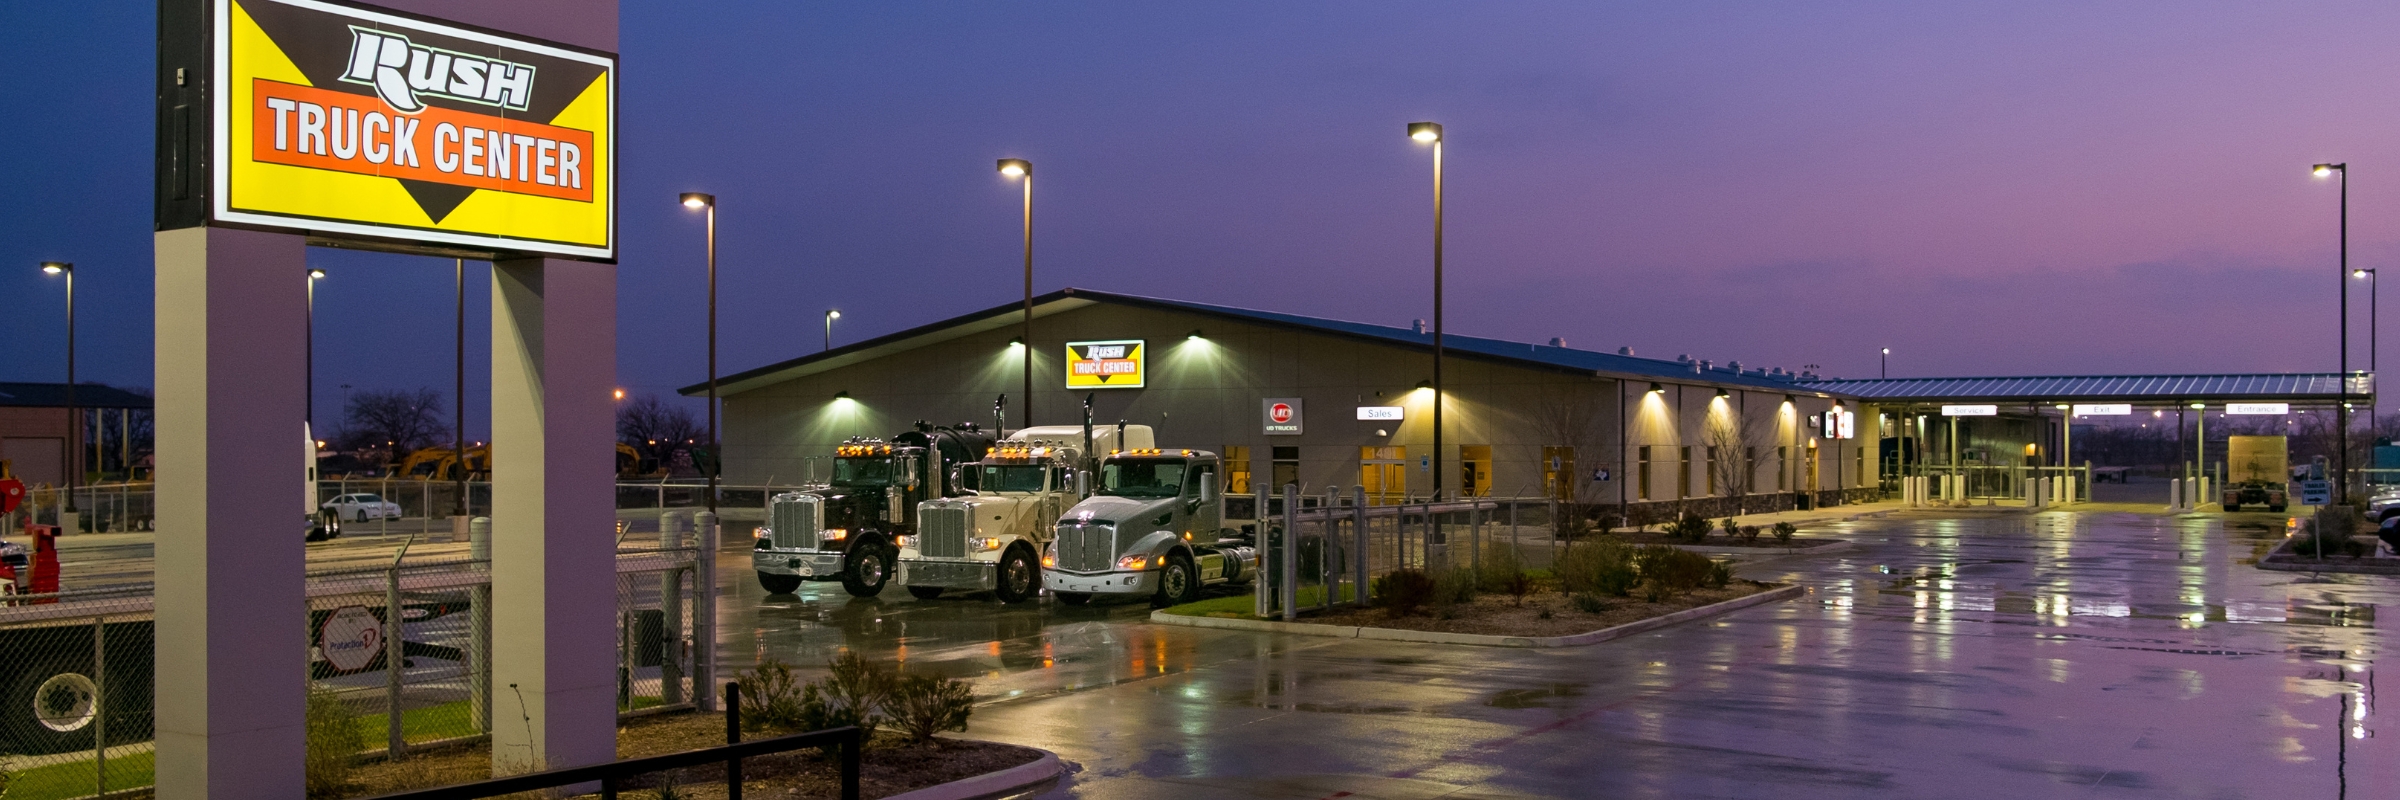 Rush Truck Centers - Fort Worth Exterior